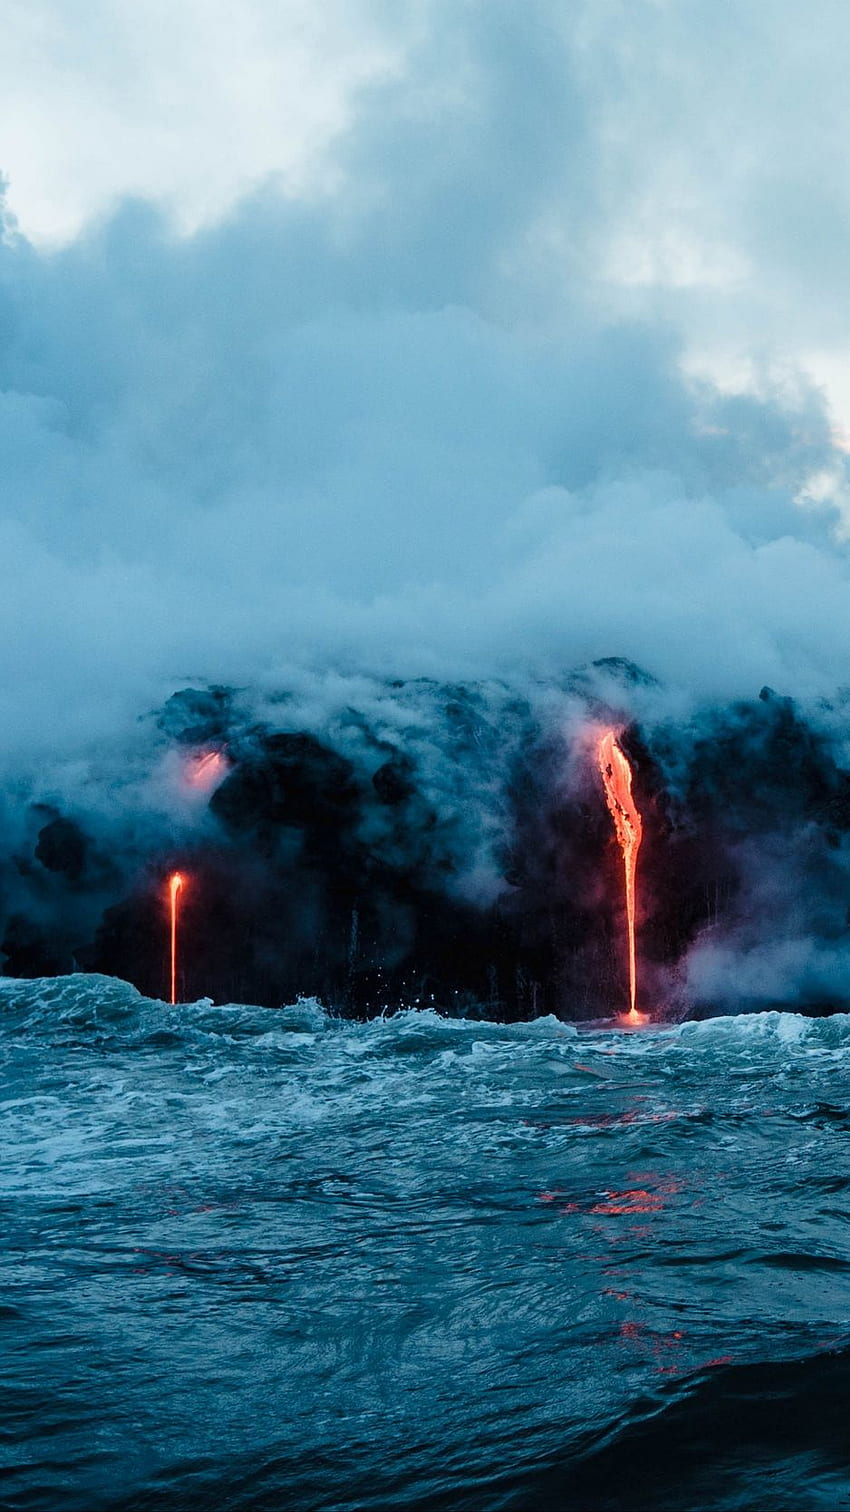 Lava Photos, Download The BEST Free Lava Stock Photos & HD Images